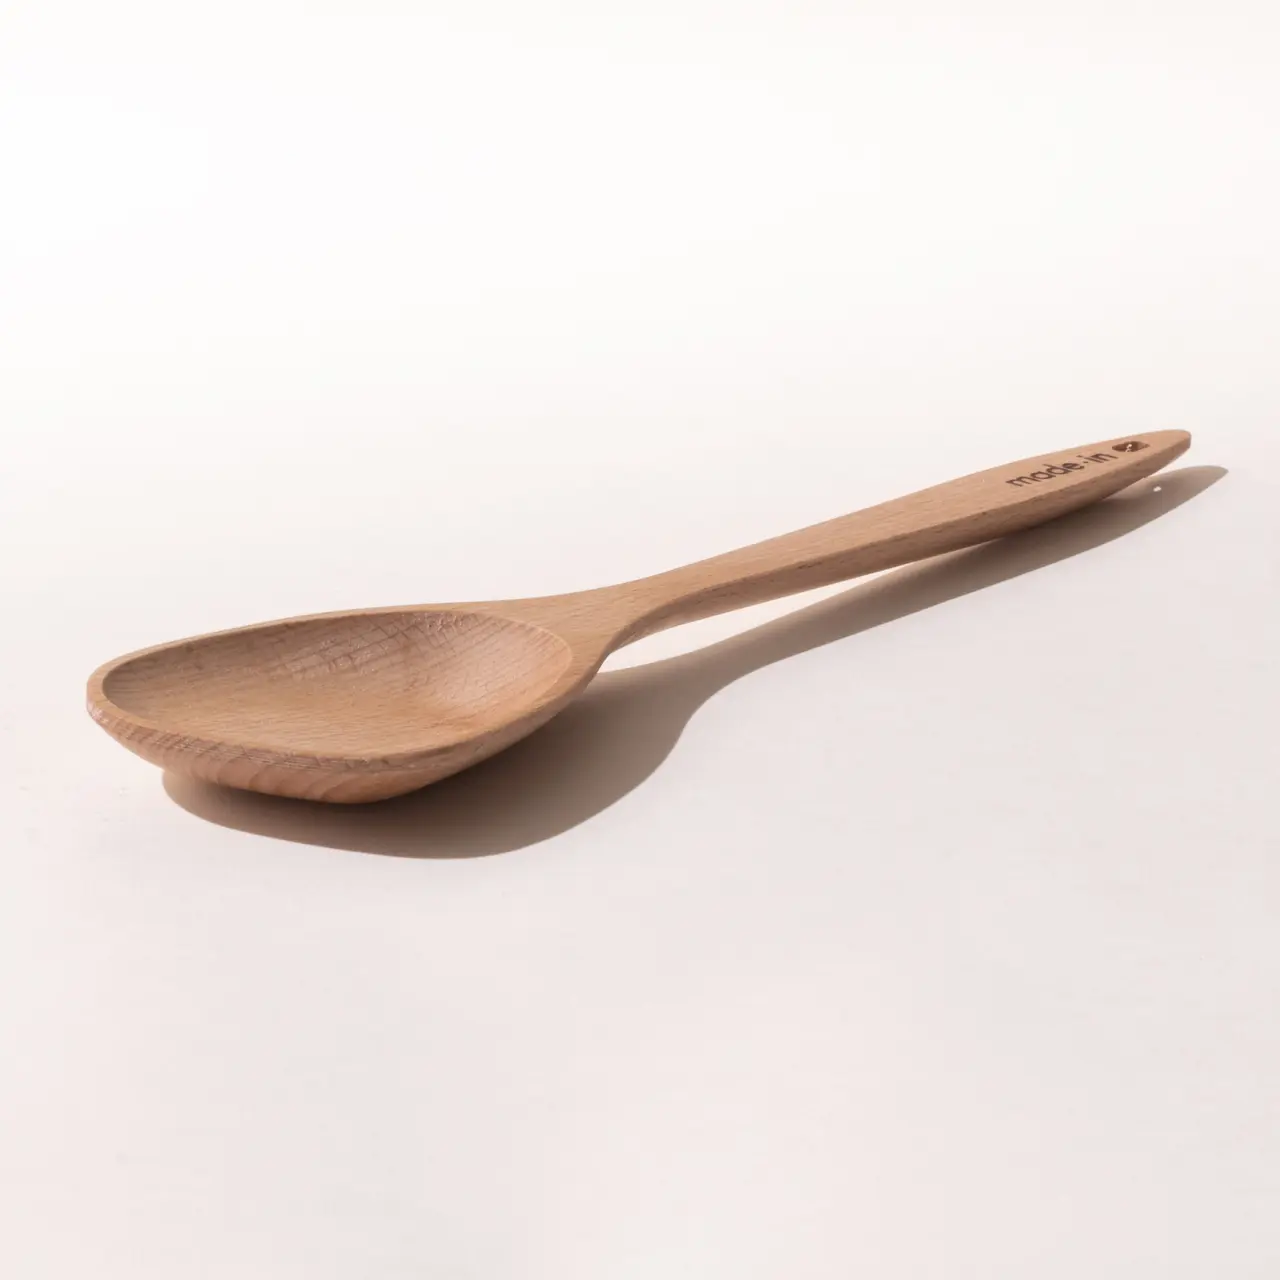 Wooden Spoon Angle 2 Image